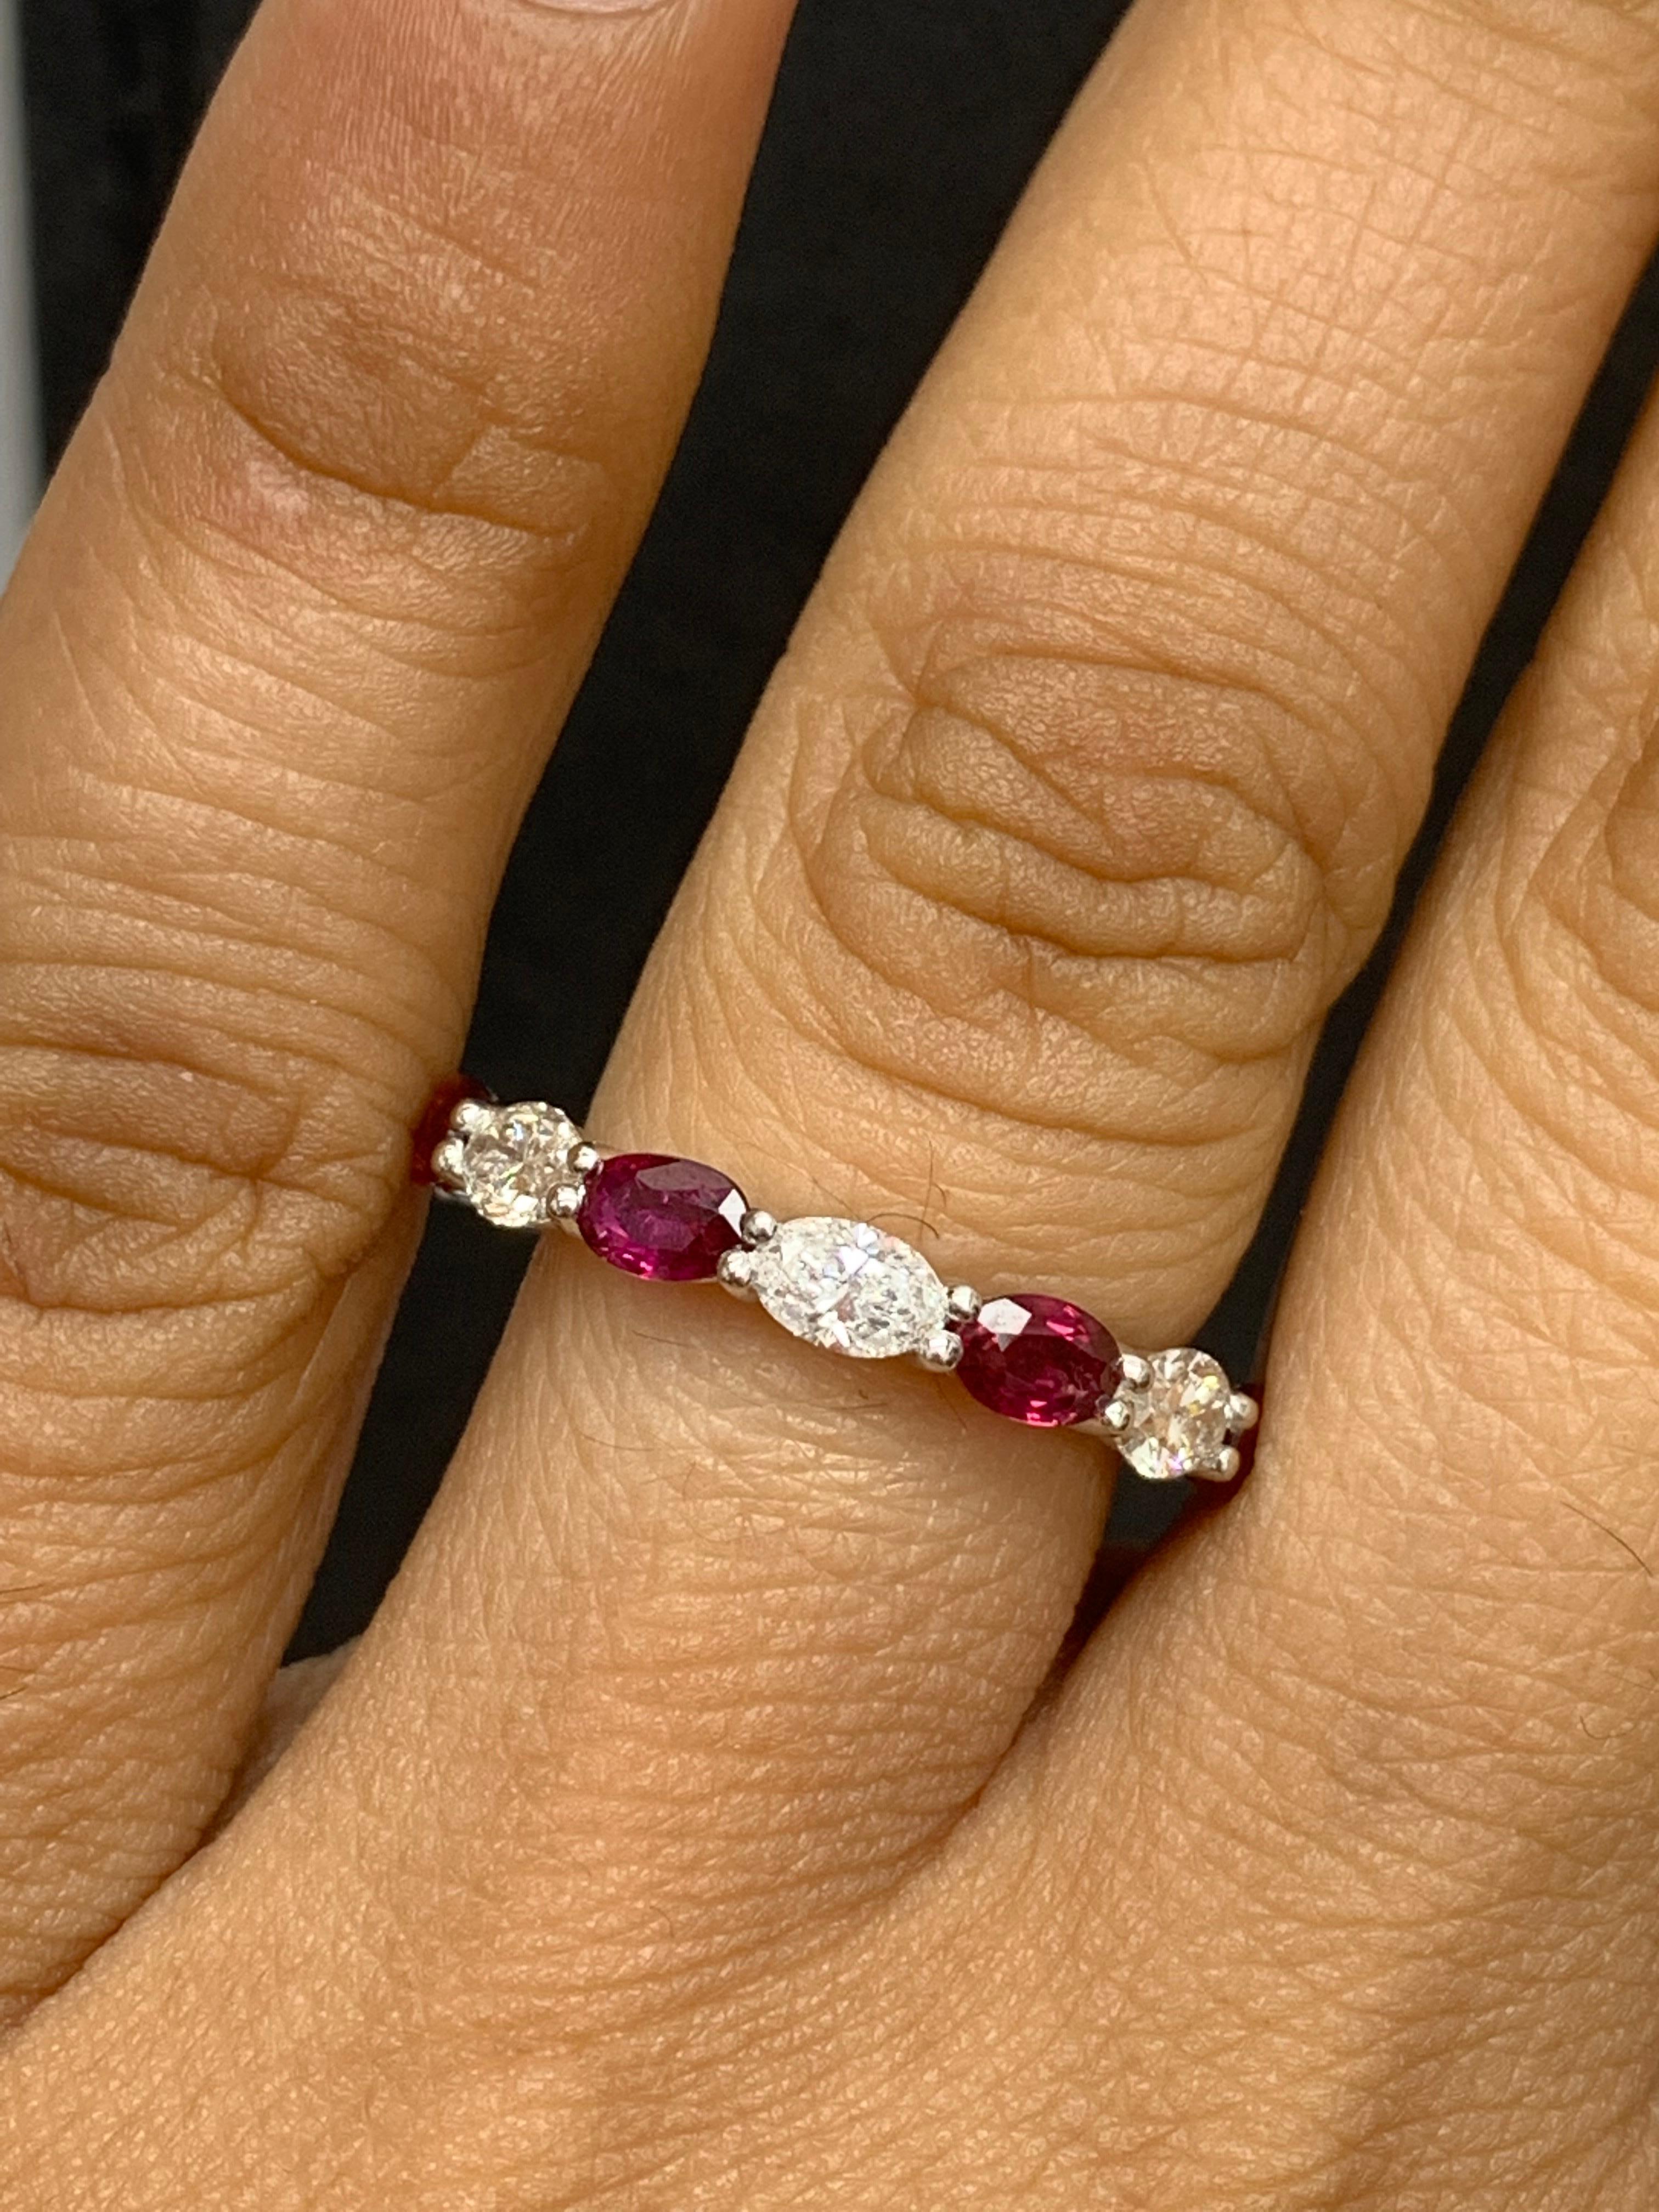 Handcrafted to perfection; showcasing color-rich oval cut rubies that elegantly alternate brilliant oval cut diamonds in a 14k white gold setting. 
The 7 Rubies weigh 2.21 carats total and 7 diamonds weigh 1.41 carats total.

Size 6.5 US (Sizable).